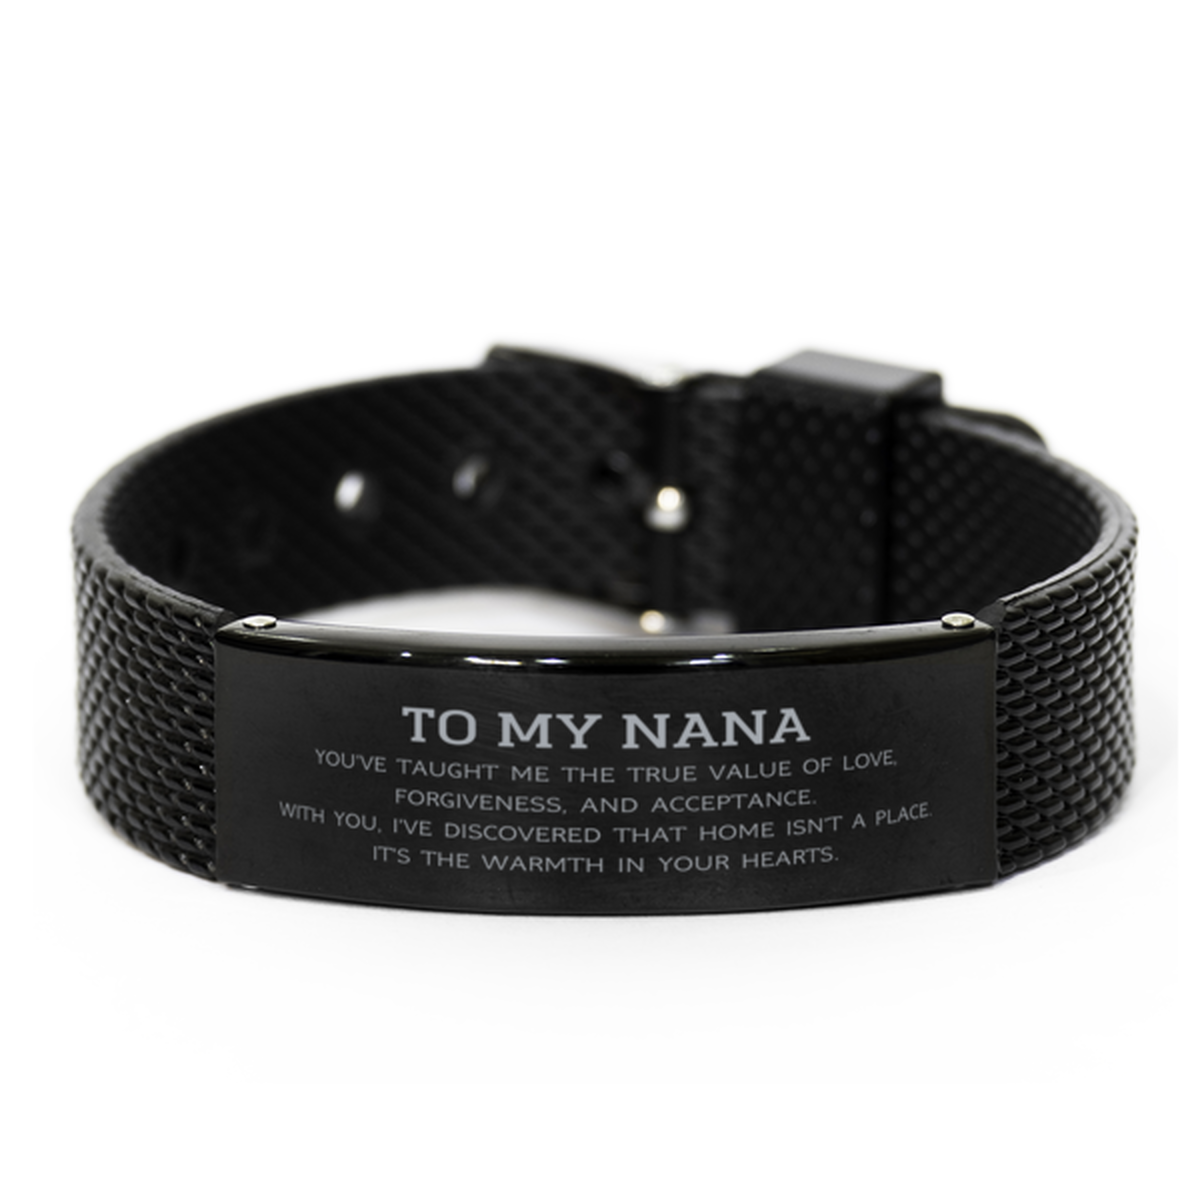 To My Nana Gifts, You've taught me the true value of love, Thank You Gifts For Nana, Birthday Black Shark Mesh Bracelet For Nana